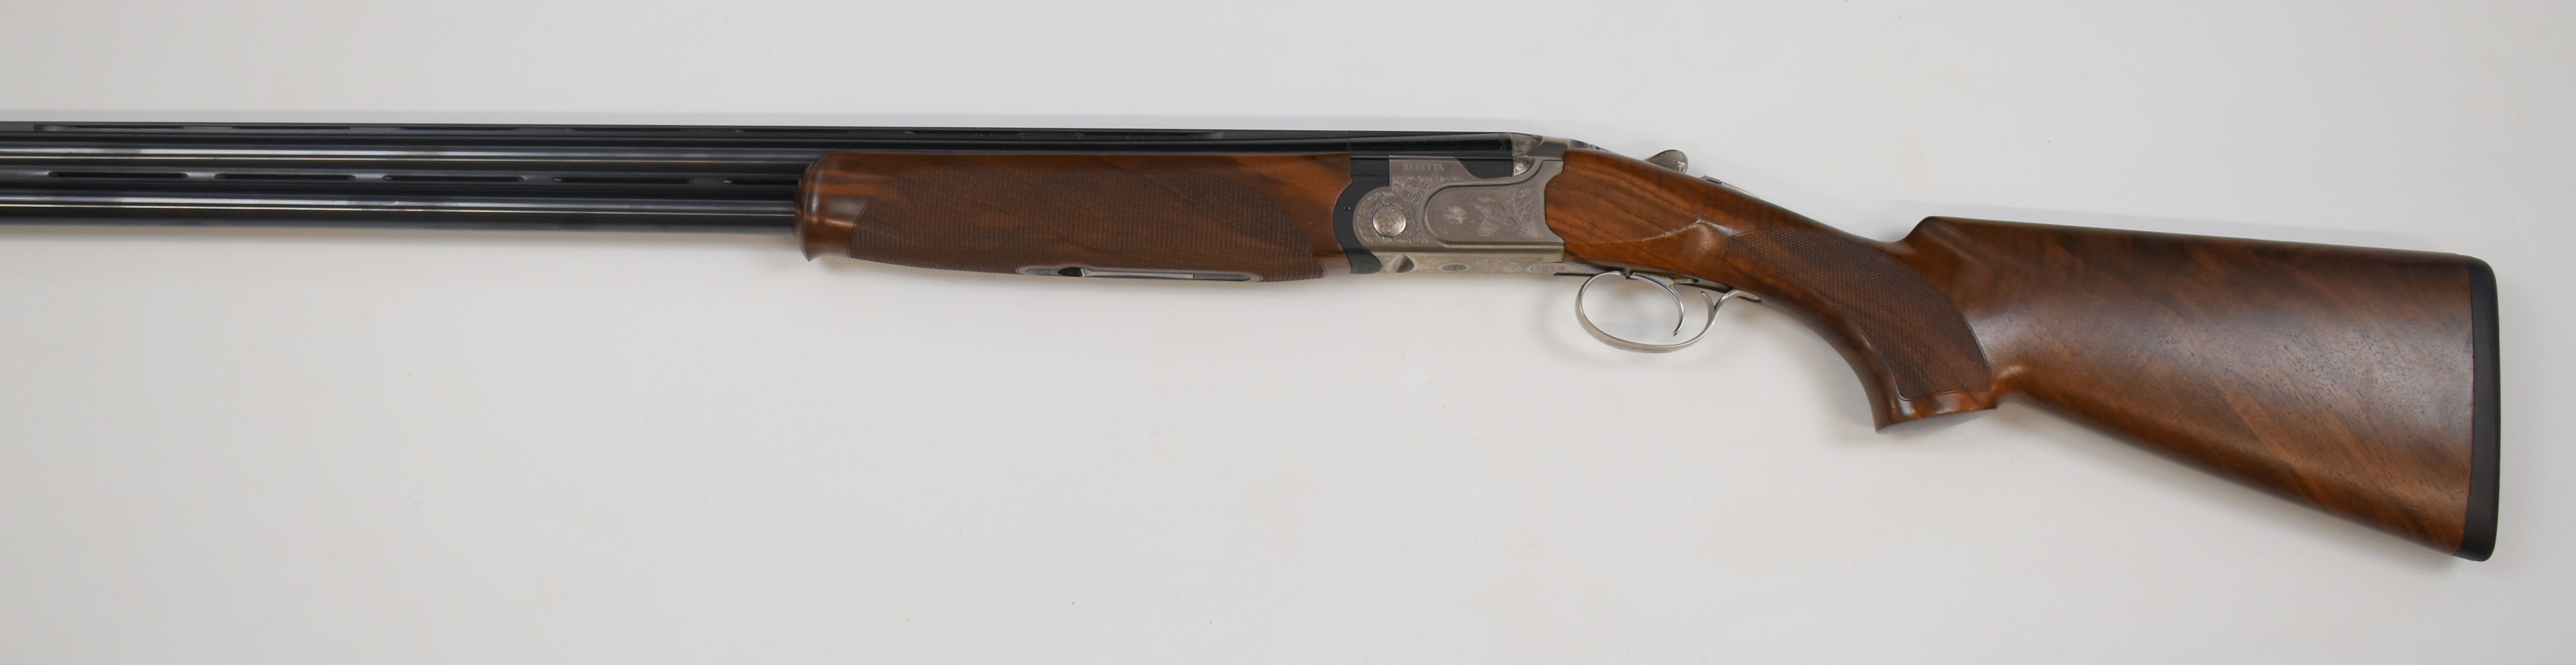 Beretta 690 III Sporting 12 bore over and under ejector shotgun with named and engraved scenes of - Image 7 of 15